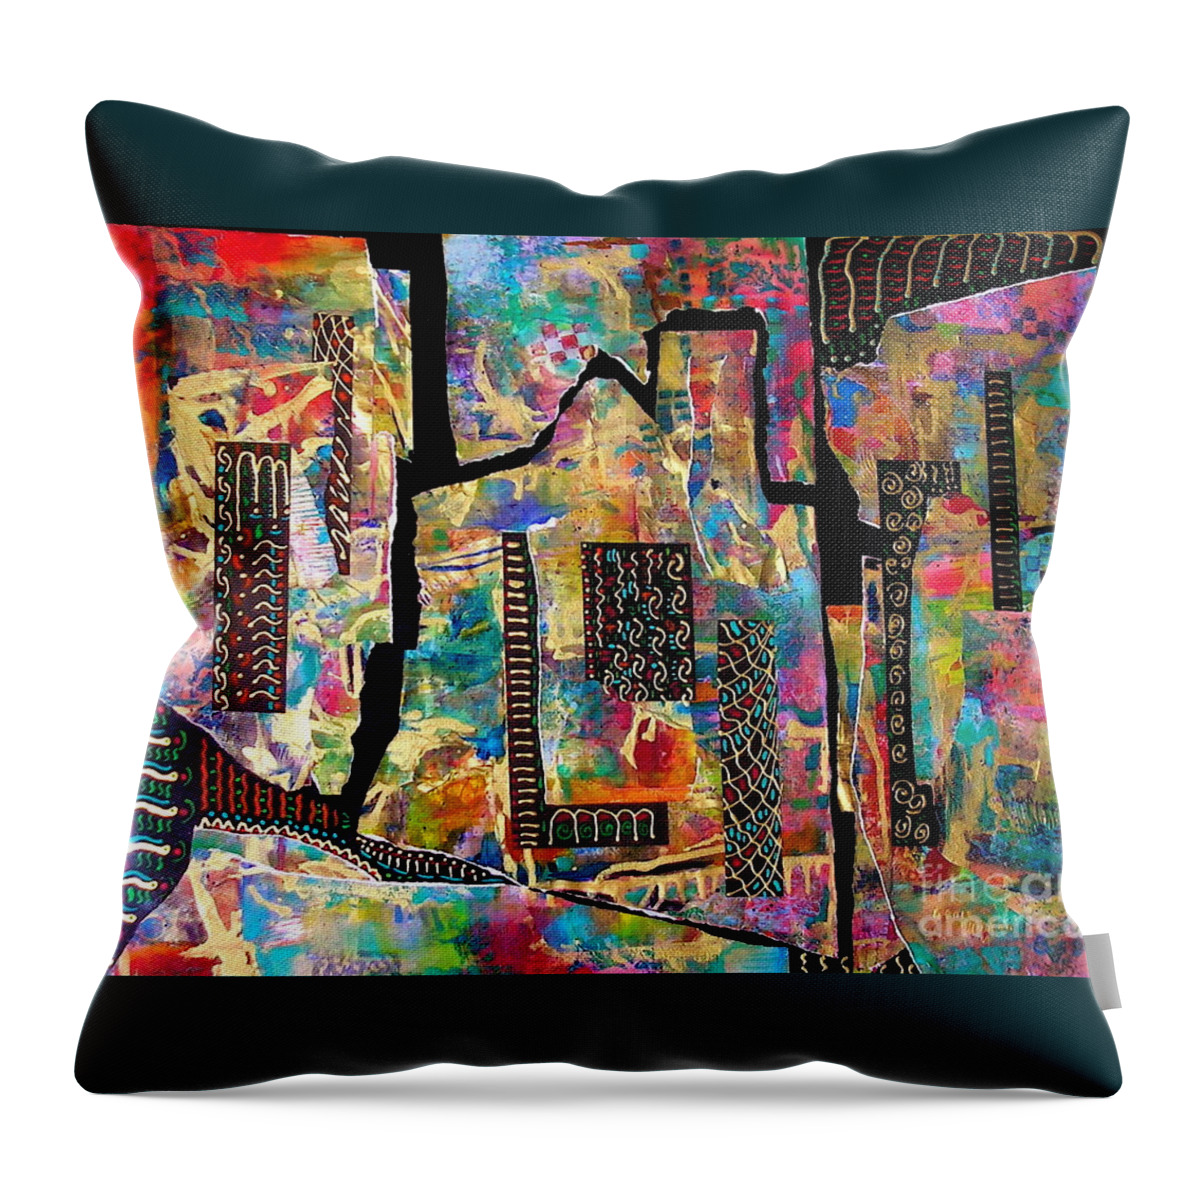 Non Objective Design Throw Pillow featuring the mixed media Color Abounds by Genie Morgan